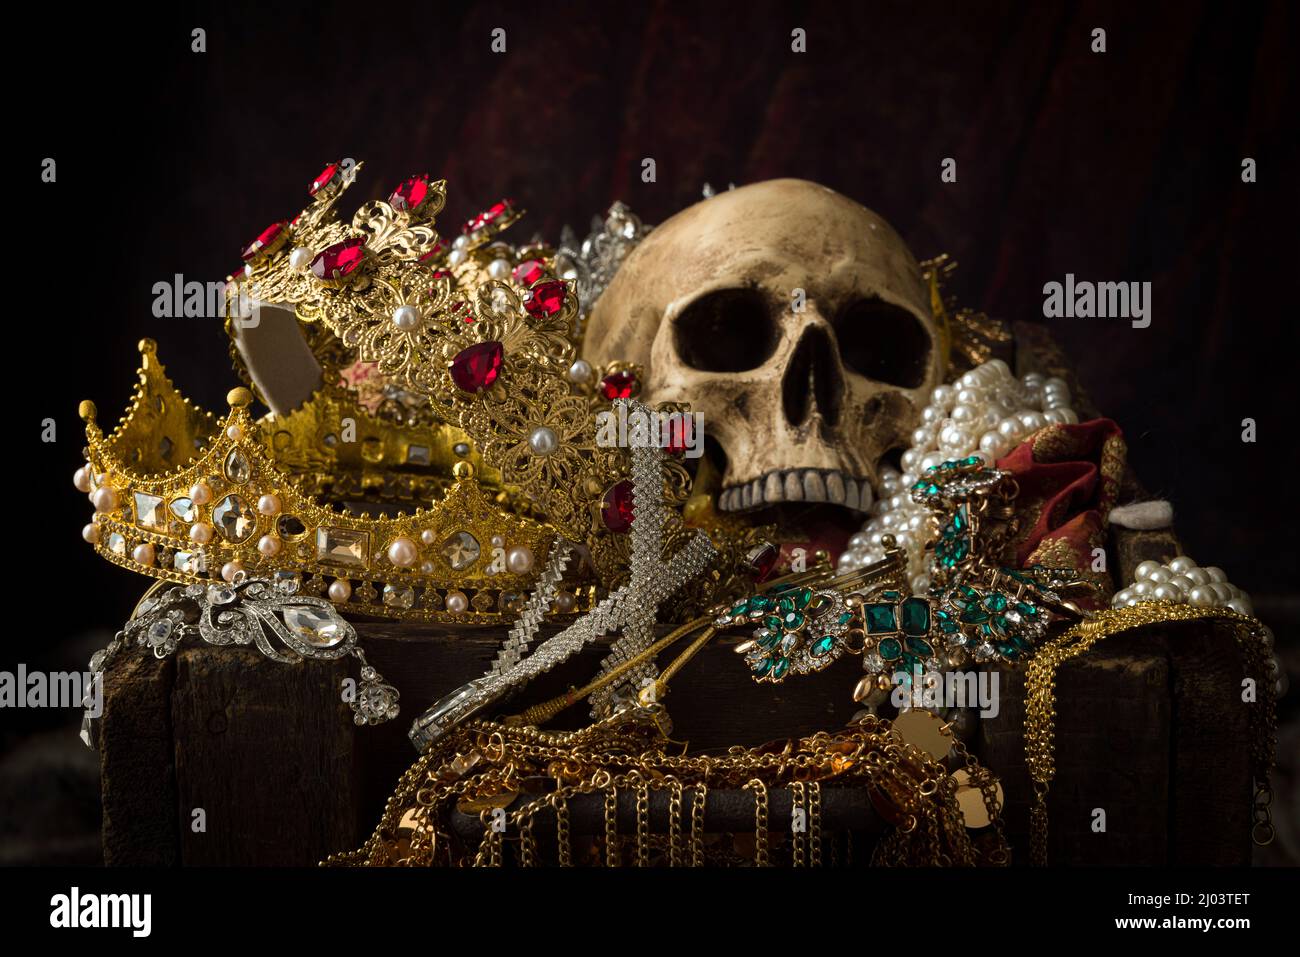 Romantic image of a treasure chest filled with jewellery, precious gems and golden king's crowns Stock Photo